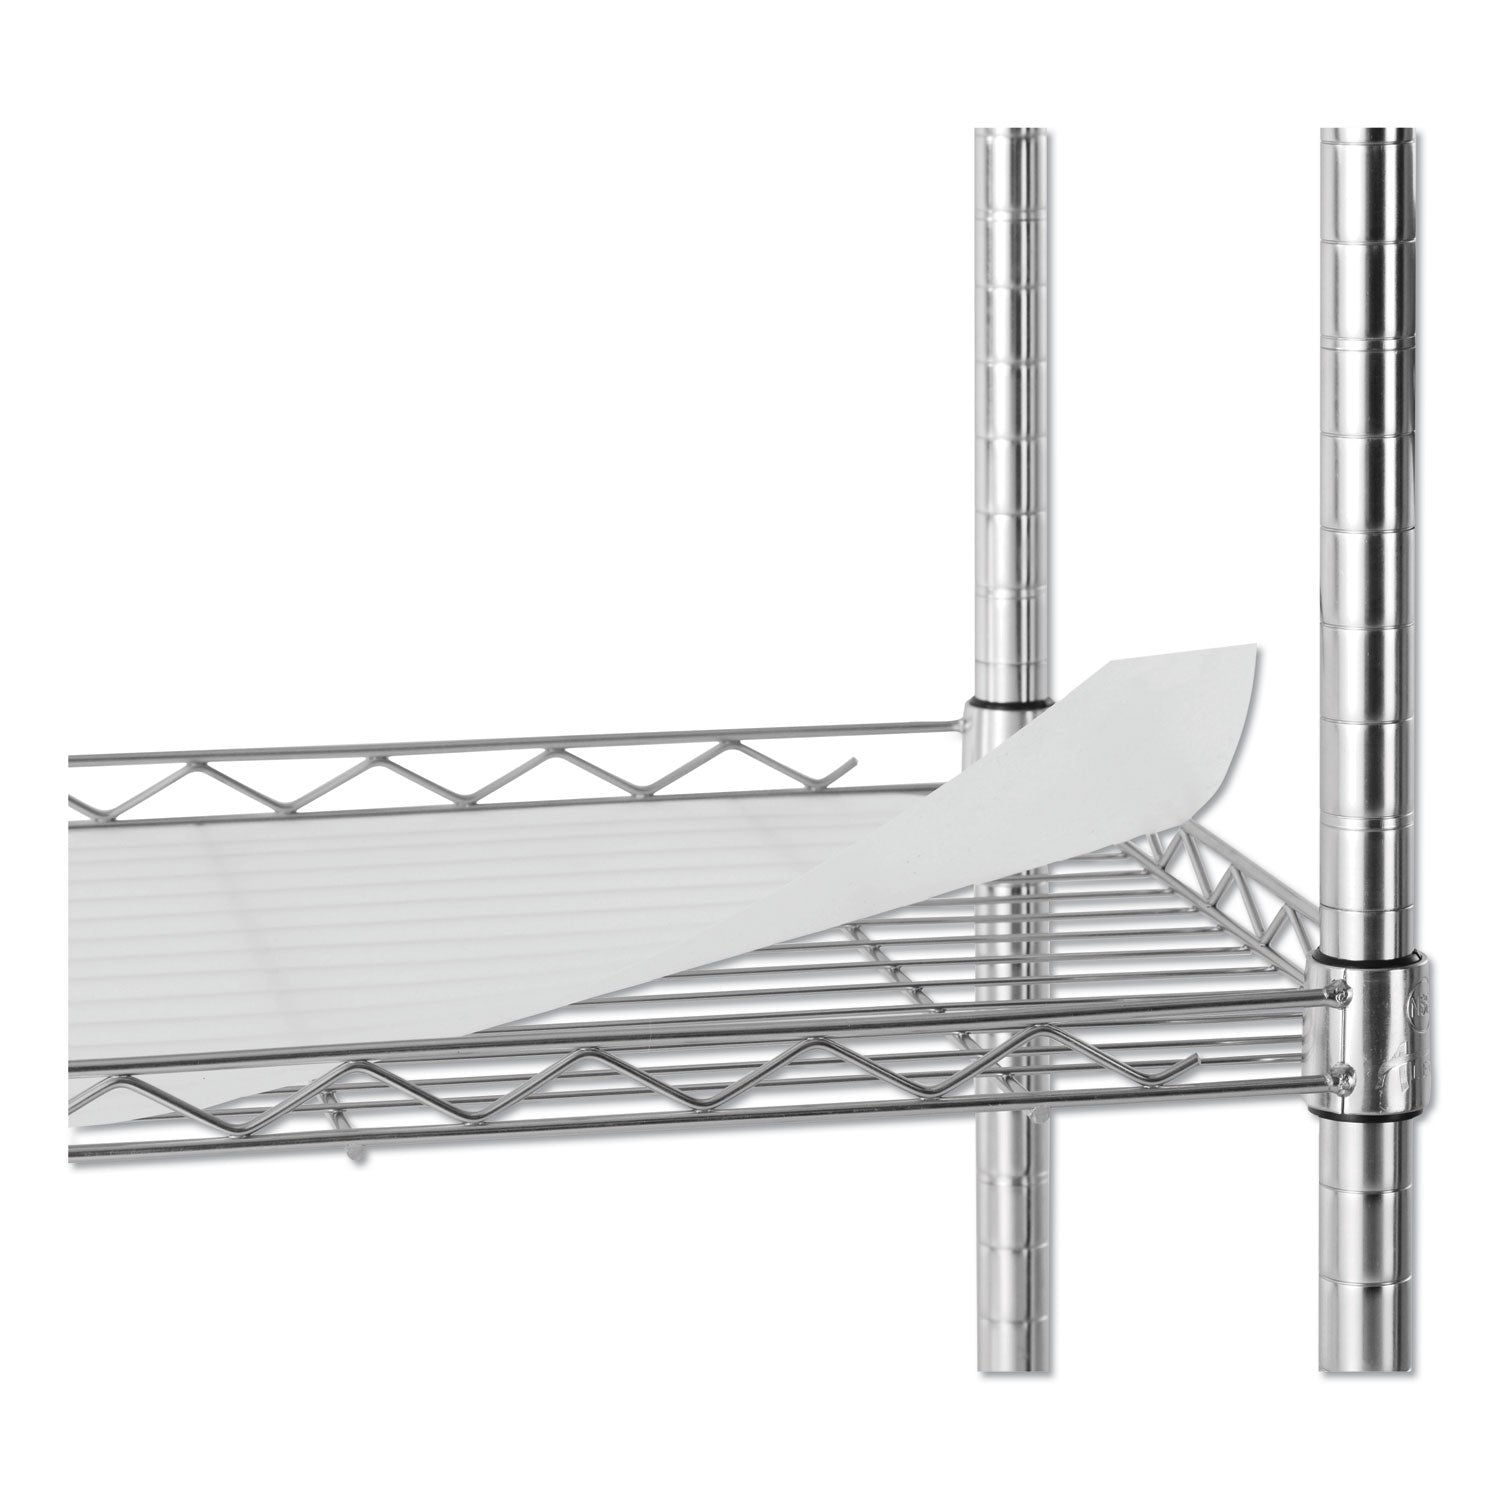 three-shelf-wire-cart-with-liners-metal-3-shelves-450-lb-capacity-24-x-16-x-39-silver_alesw322416sr - 4